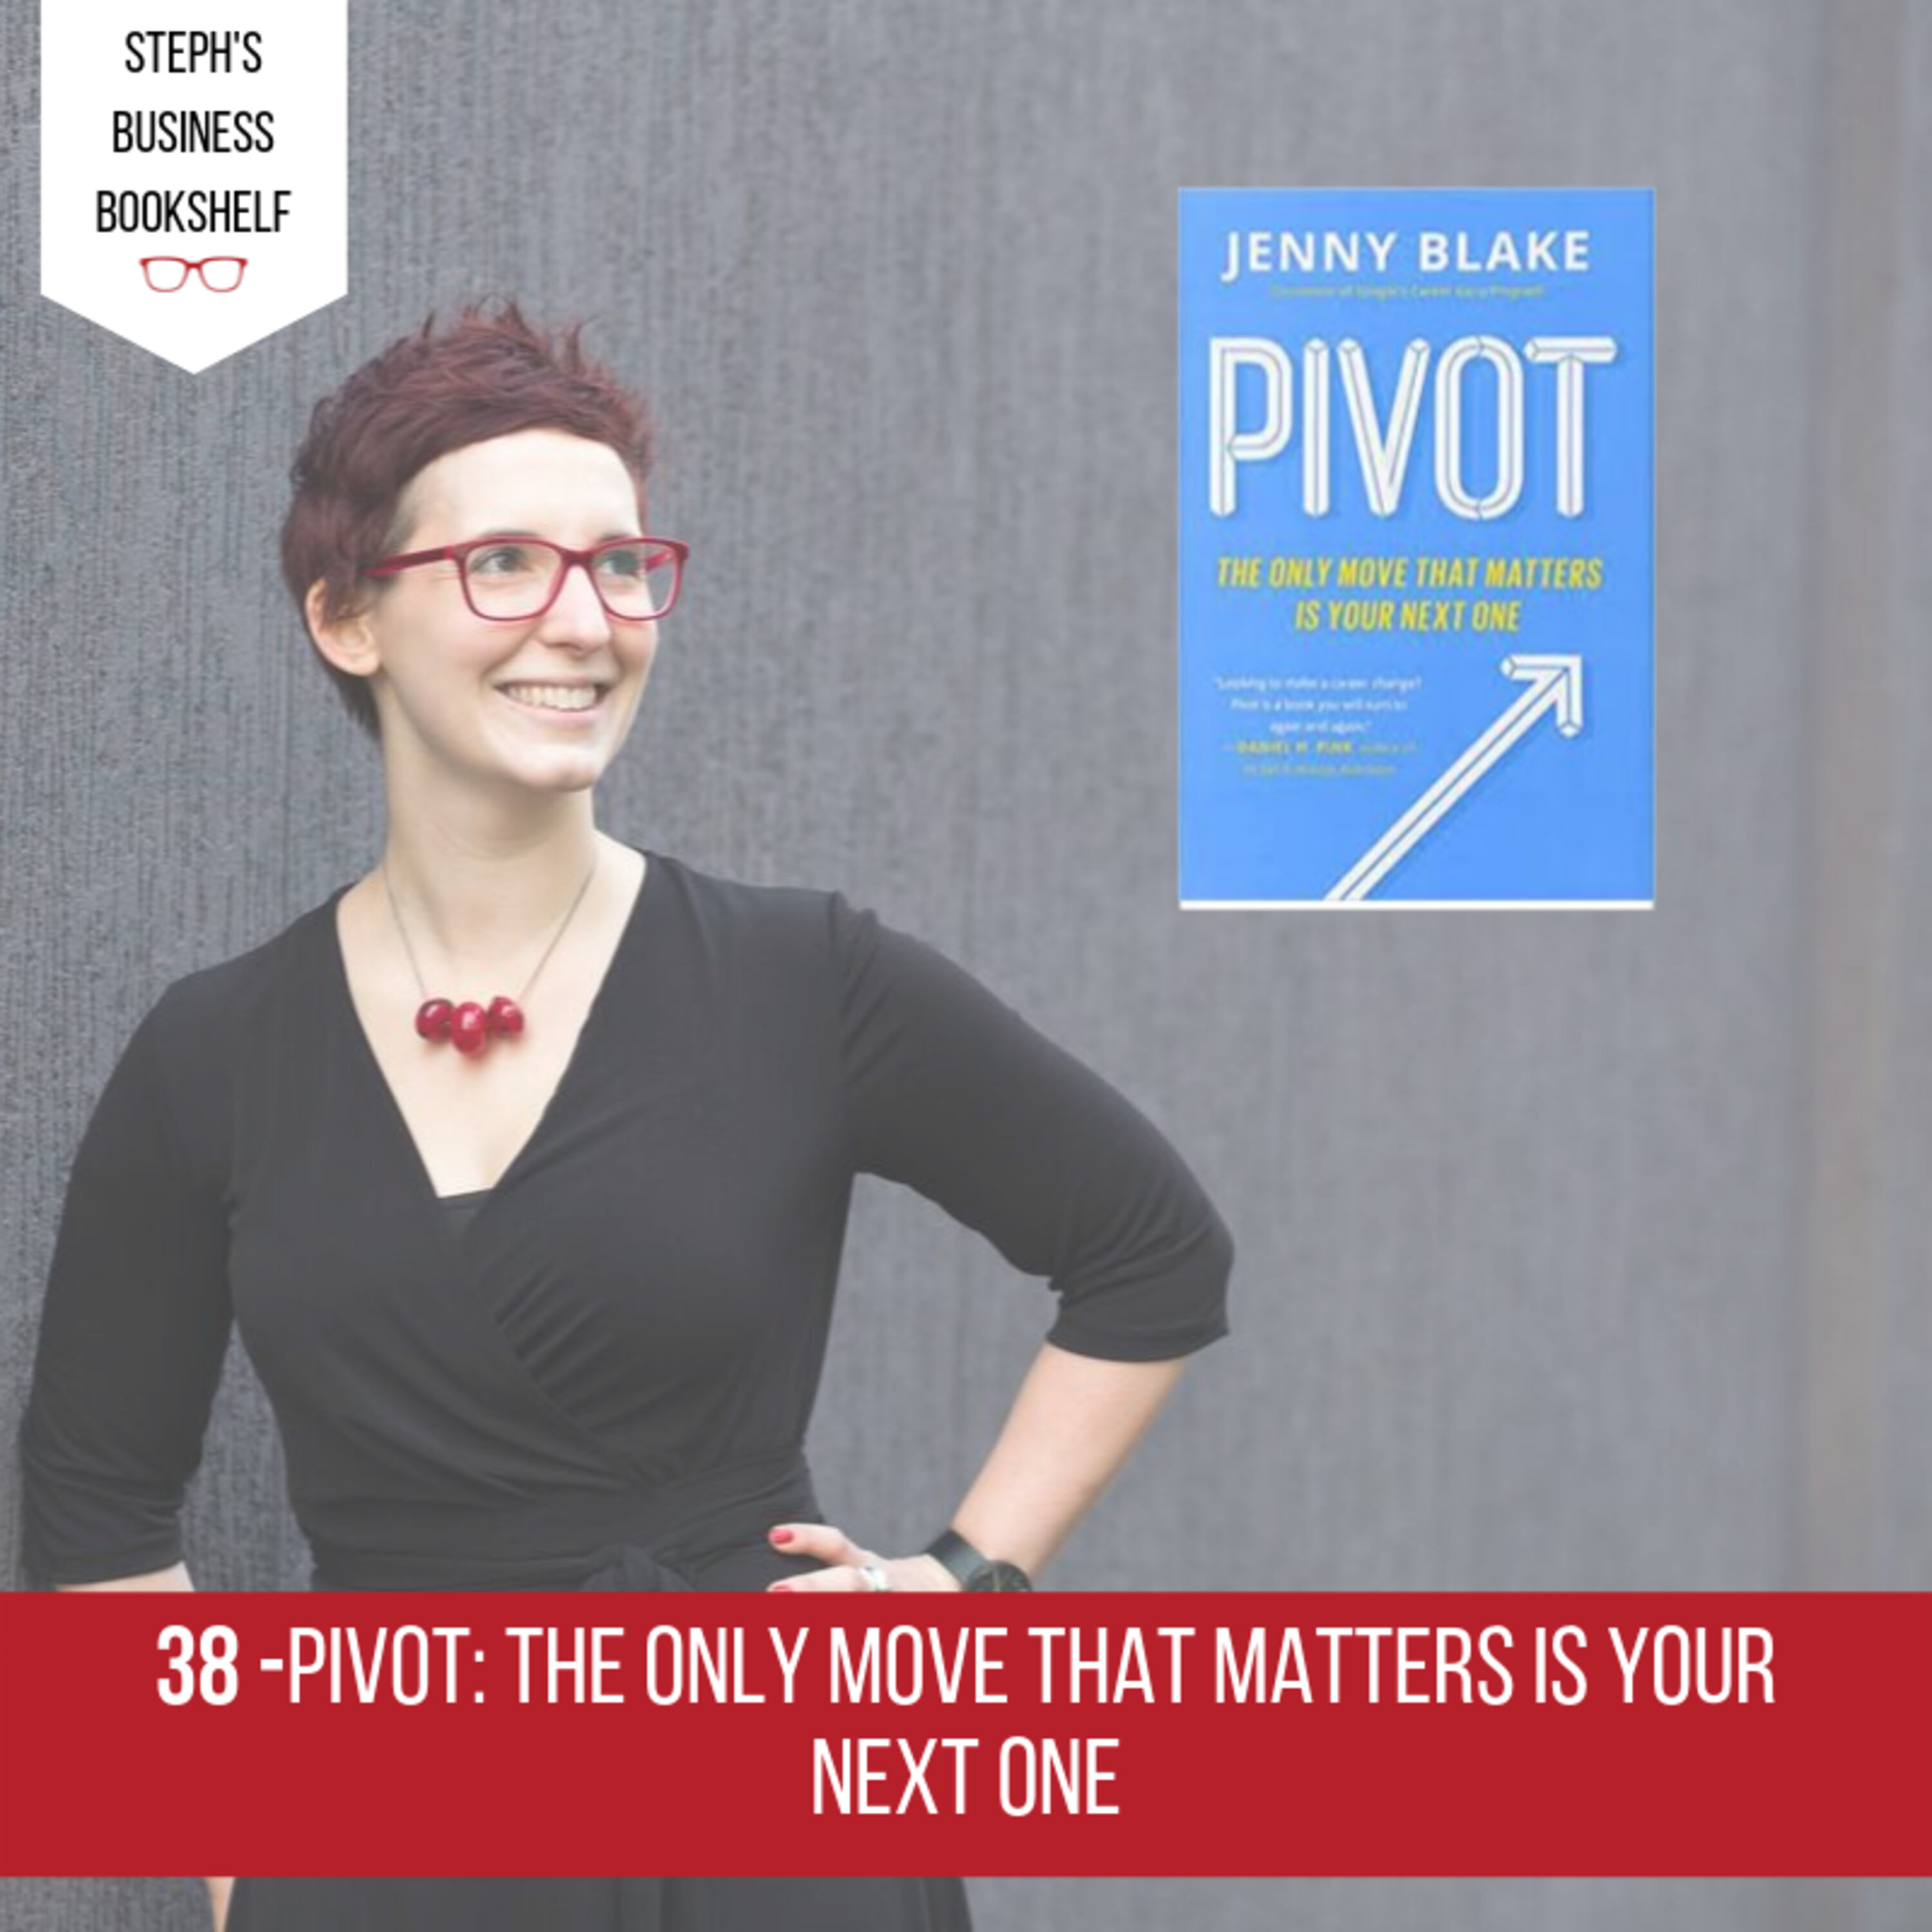 Pivot by Jenny Blake: The only move that matters is your next one